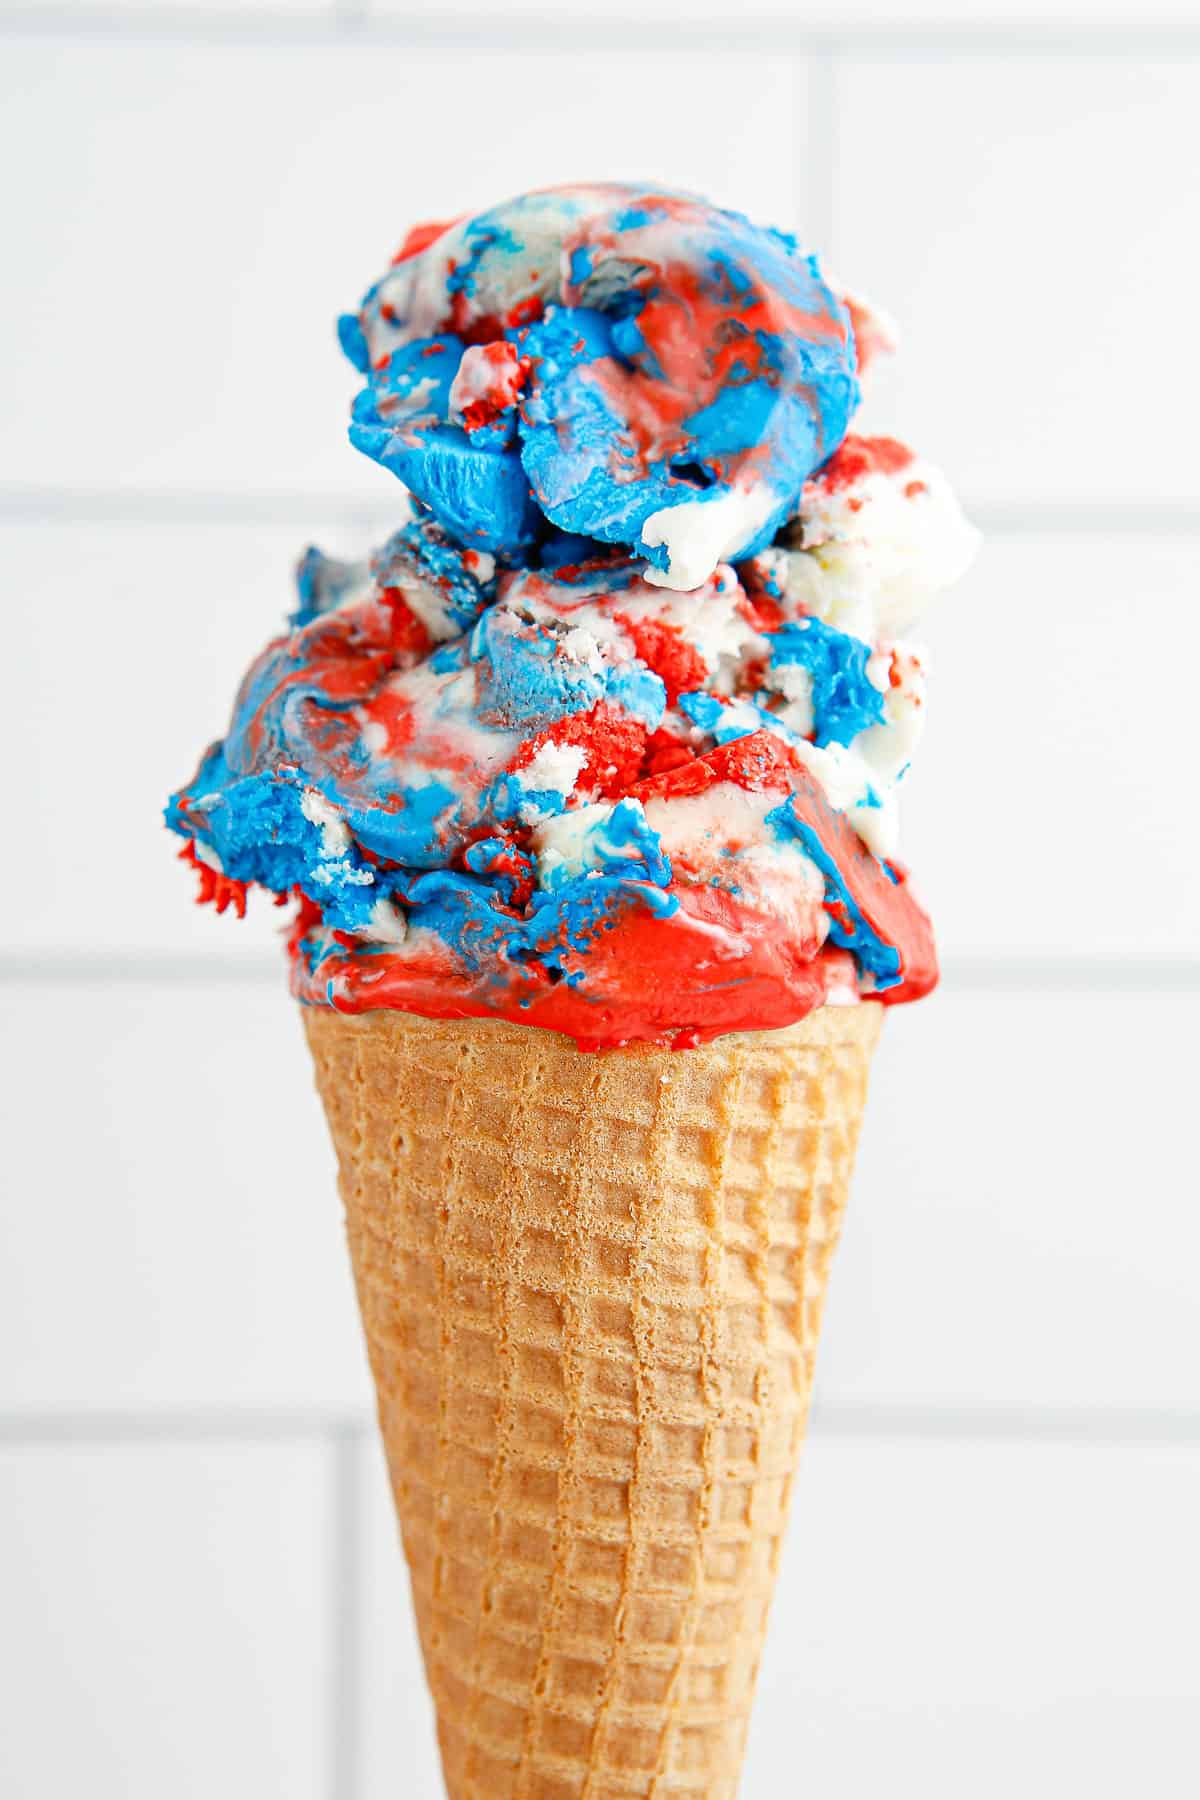 An ice cream cone with 2 scoops of red, white and blue ice cream in it.